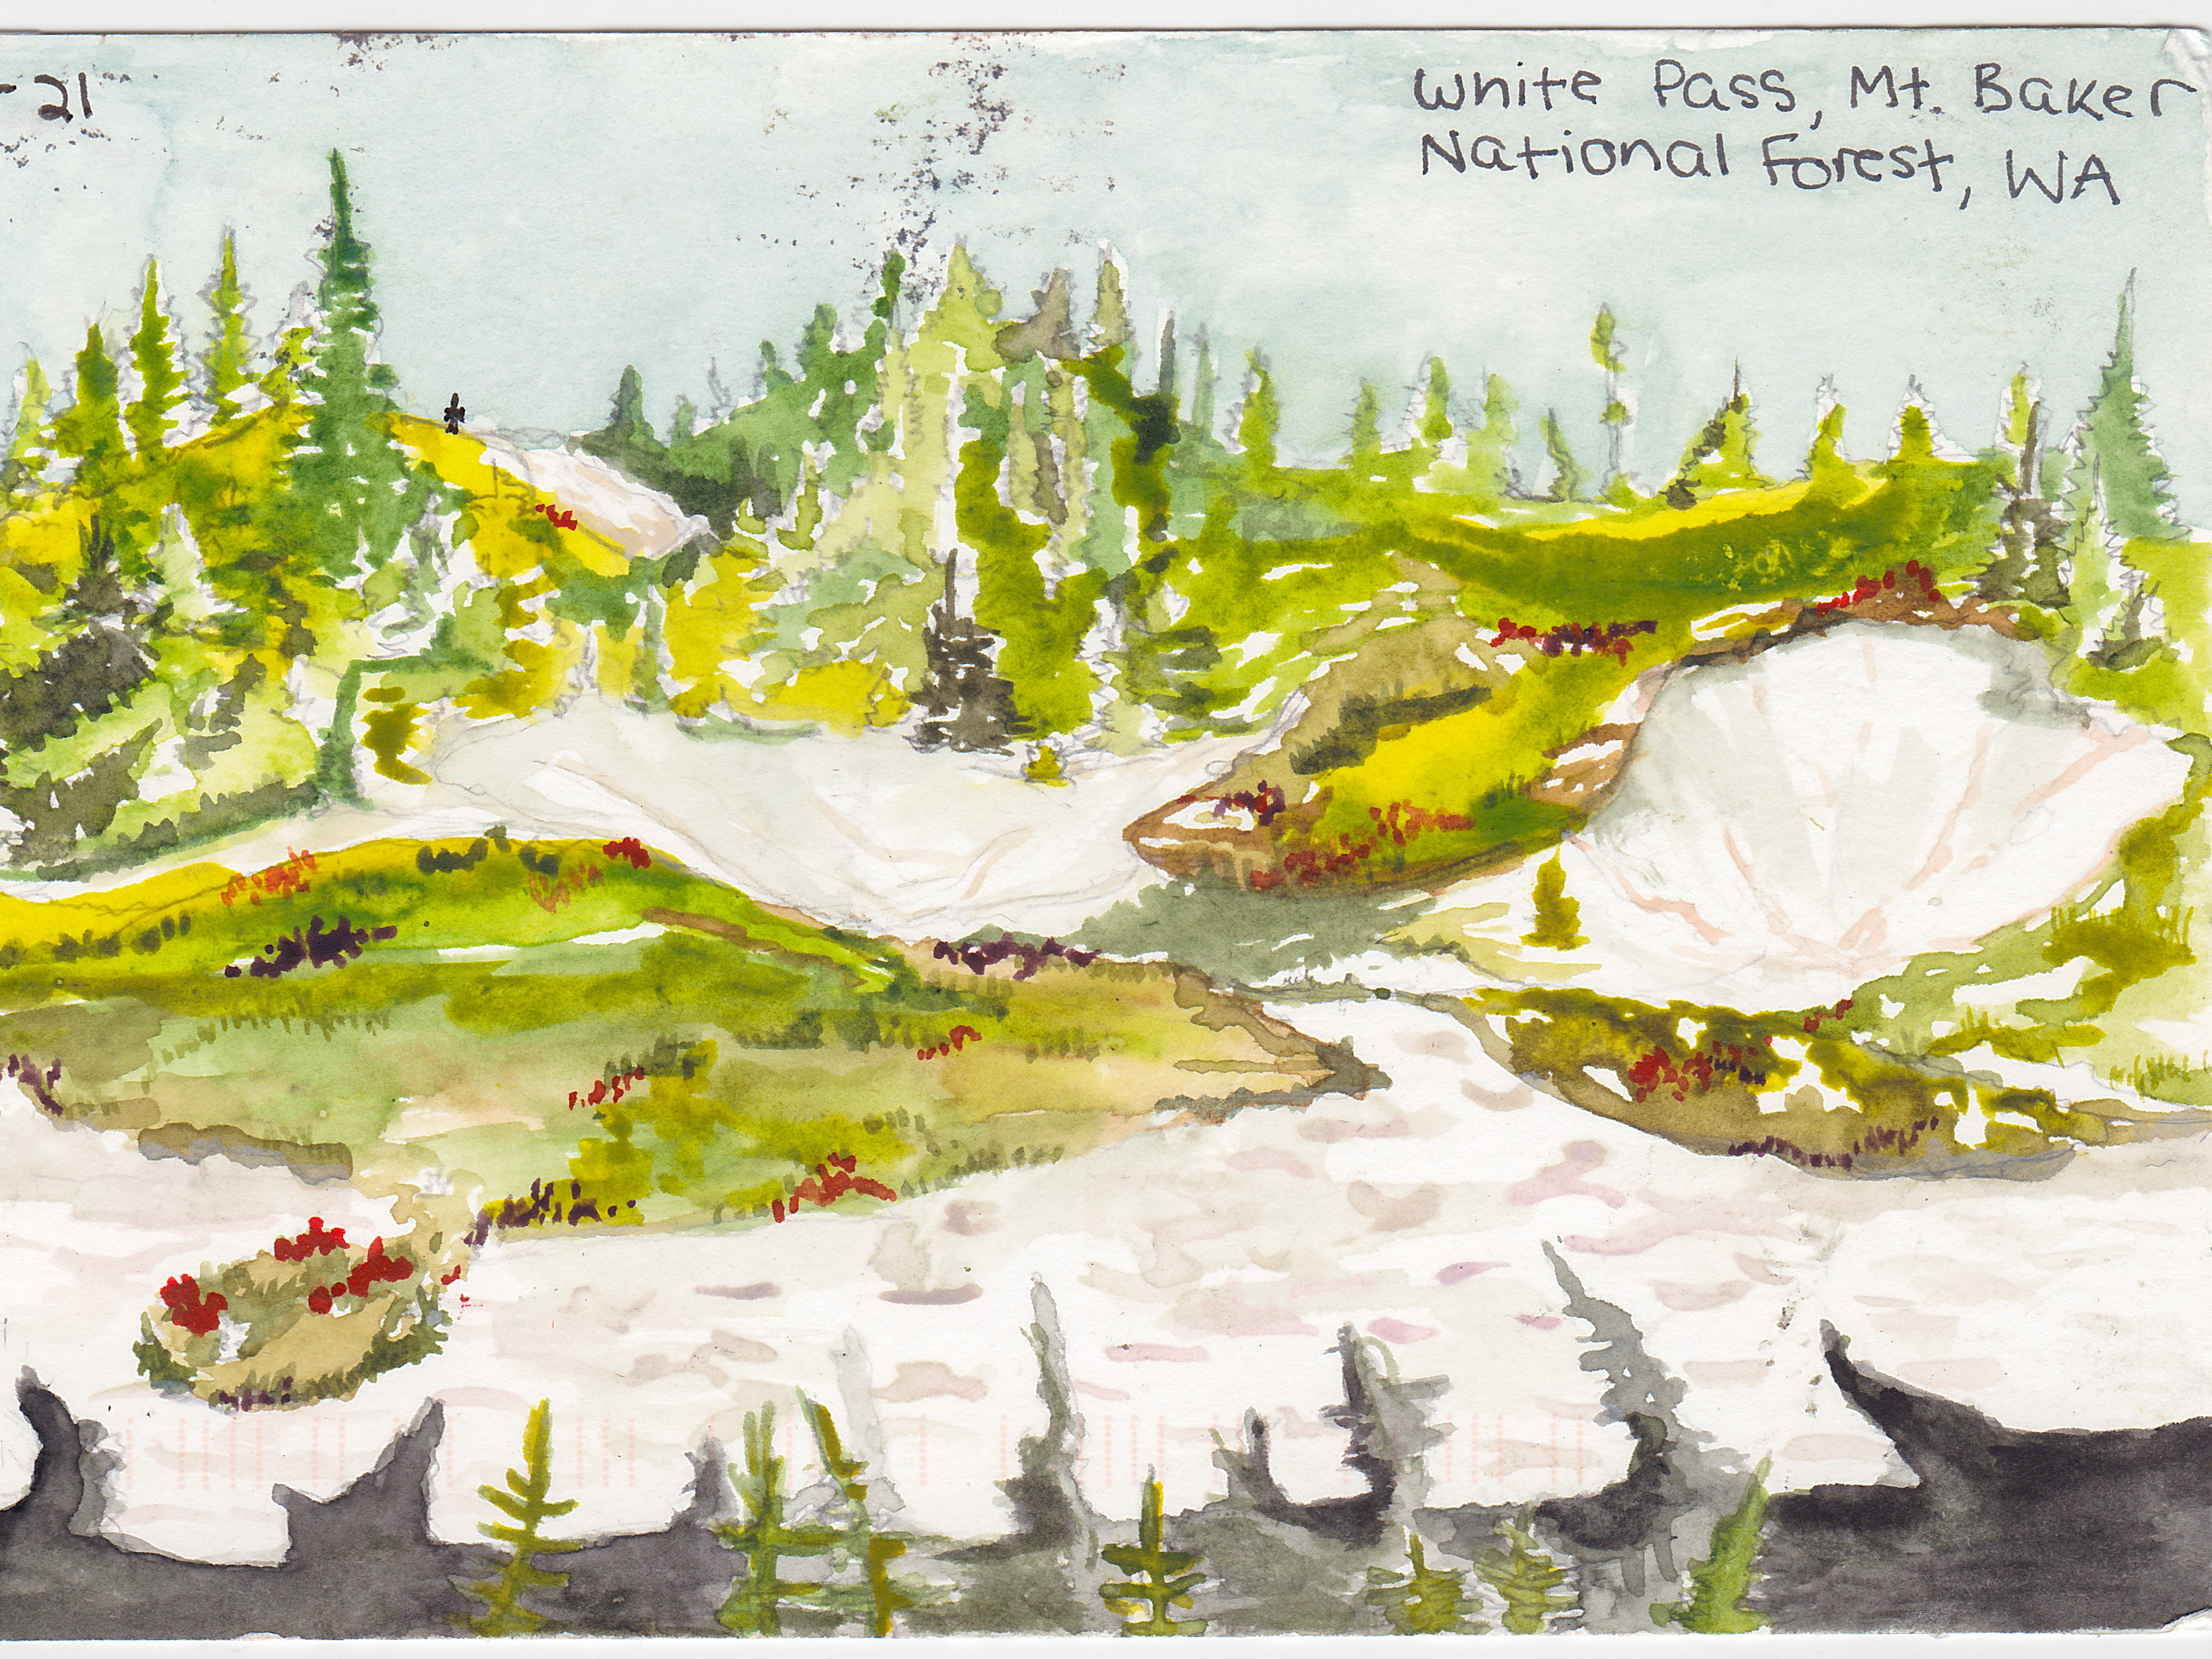 Watercolor painting of White Pass in the Mt. Baker National Forest with green grass and red flowers mixed with snowfields and trees in the distance.